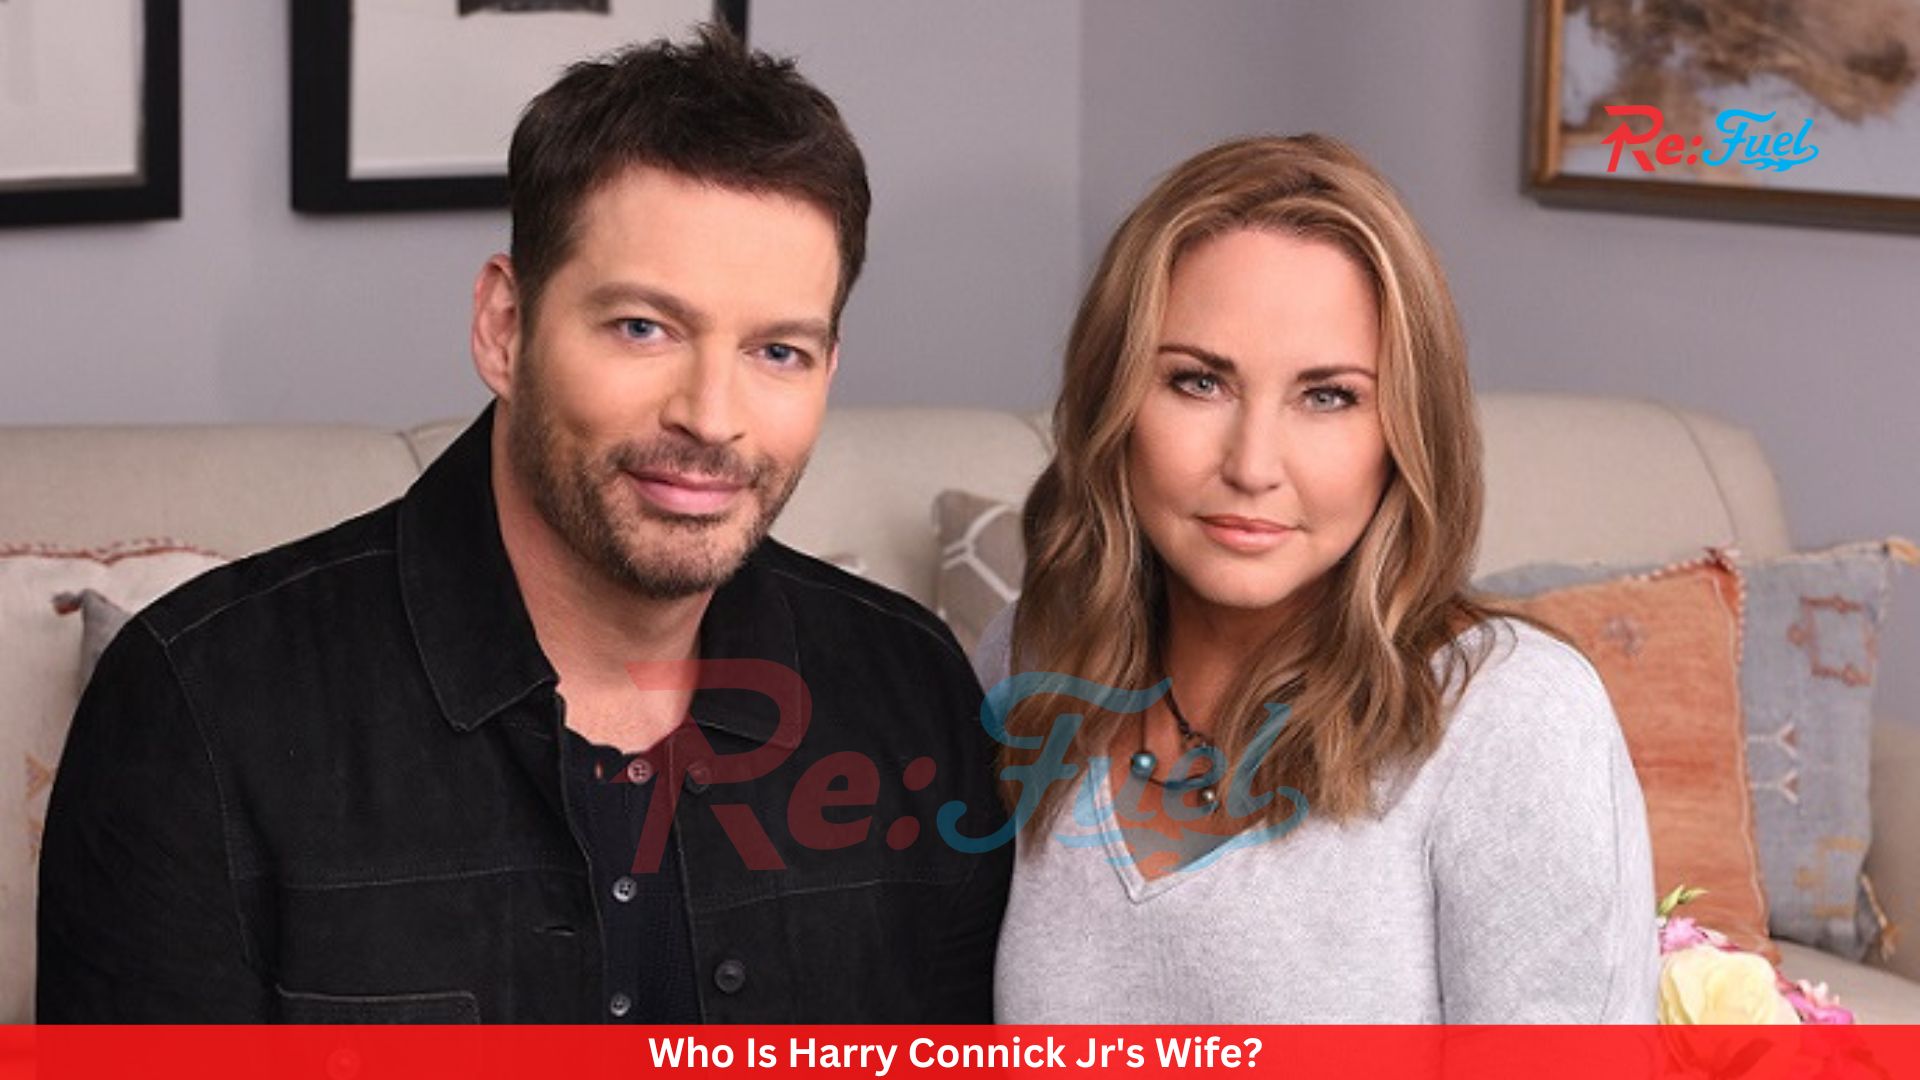 Who Is Harry Connick Jr's Wife?